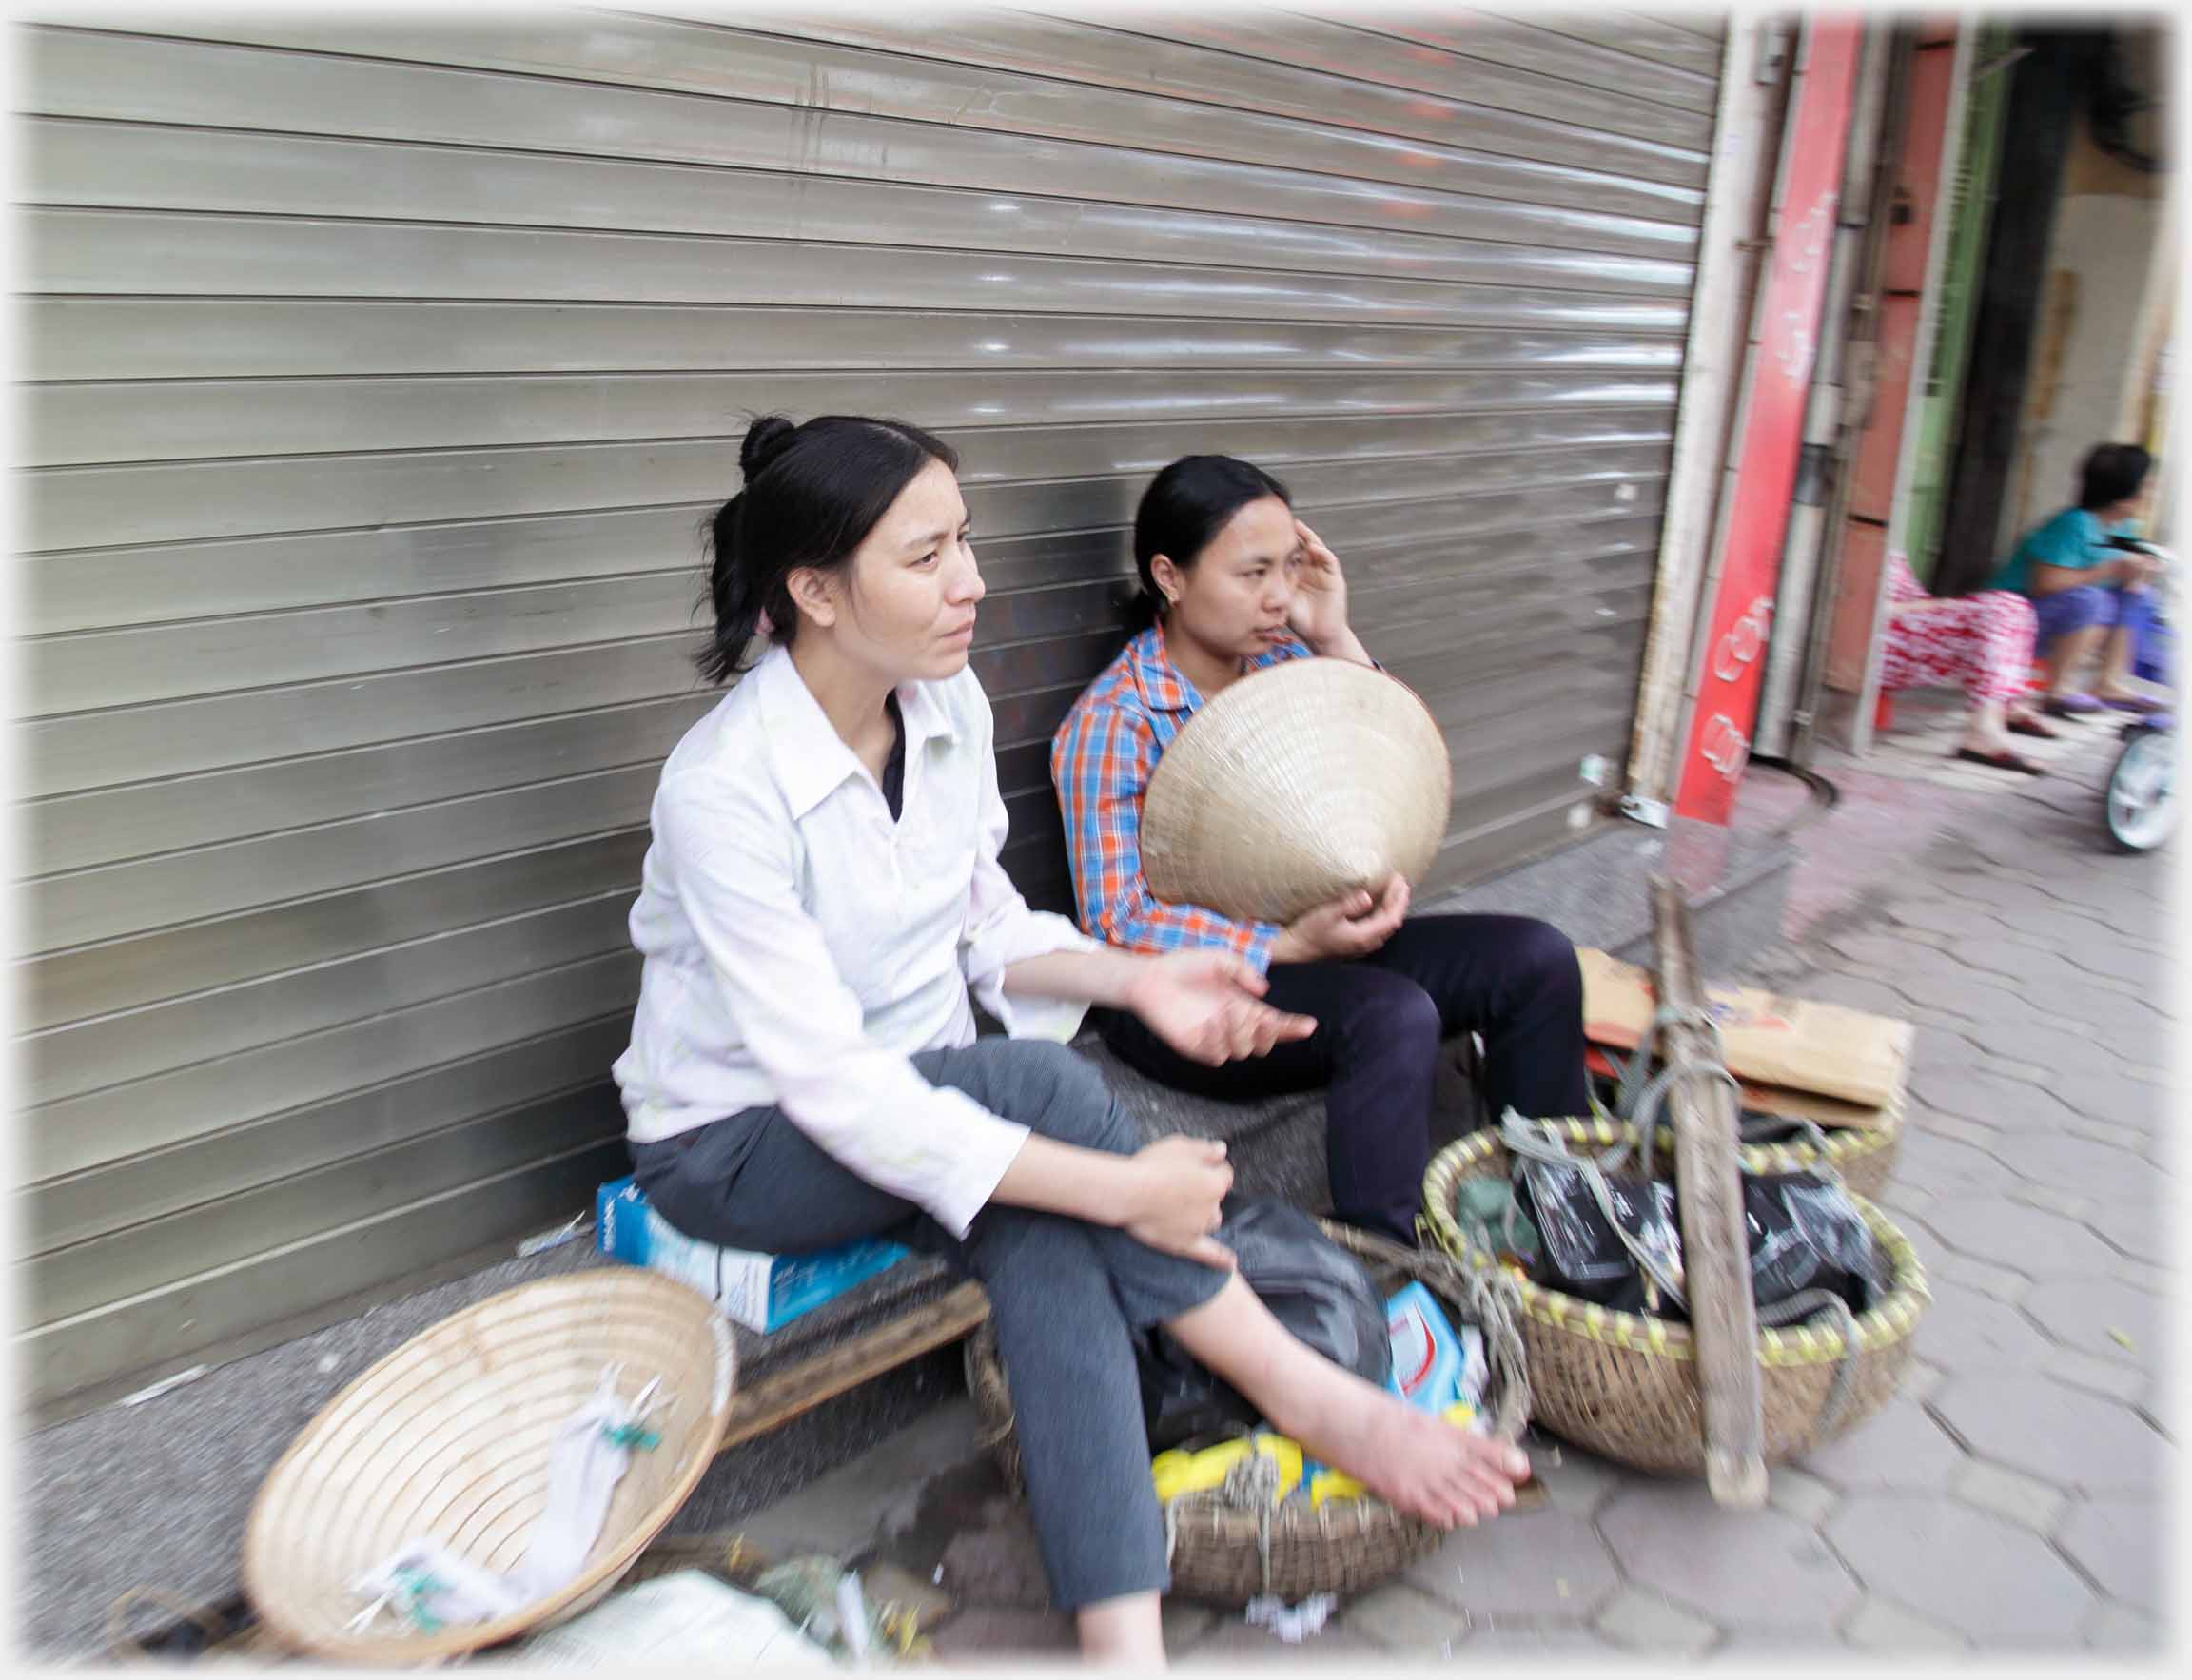 Two women resting on a door step with their panniers.